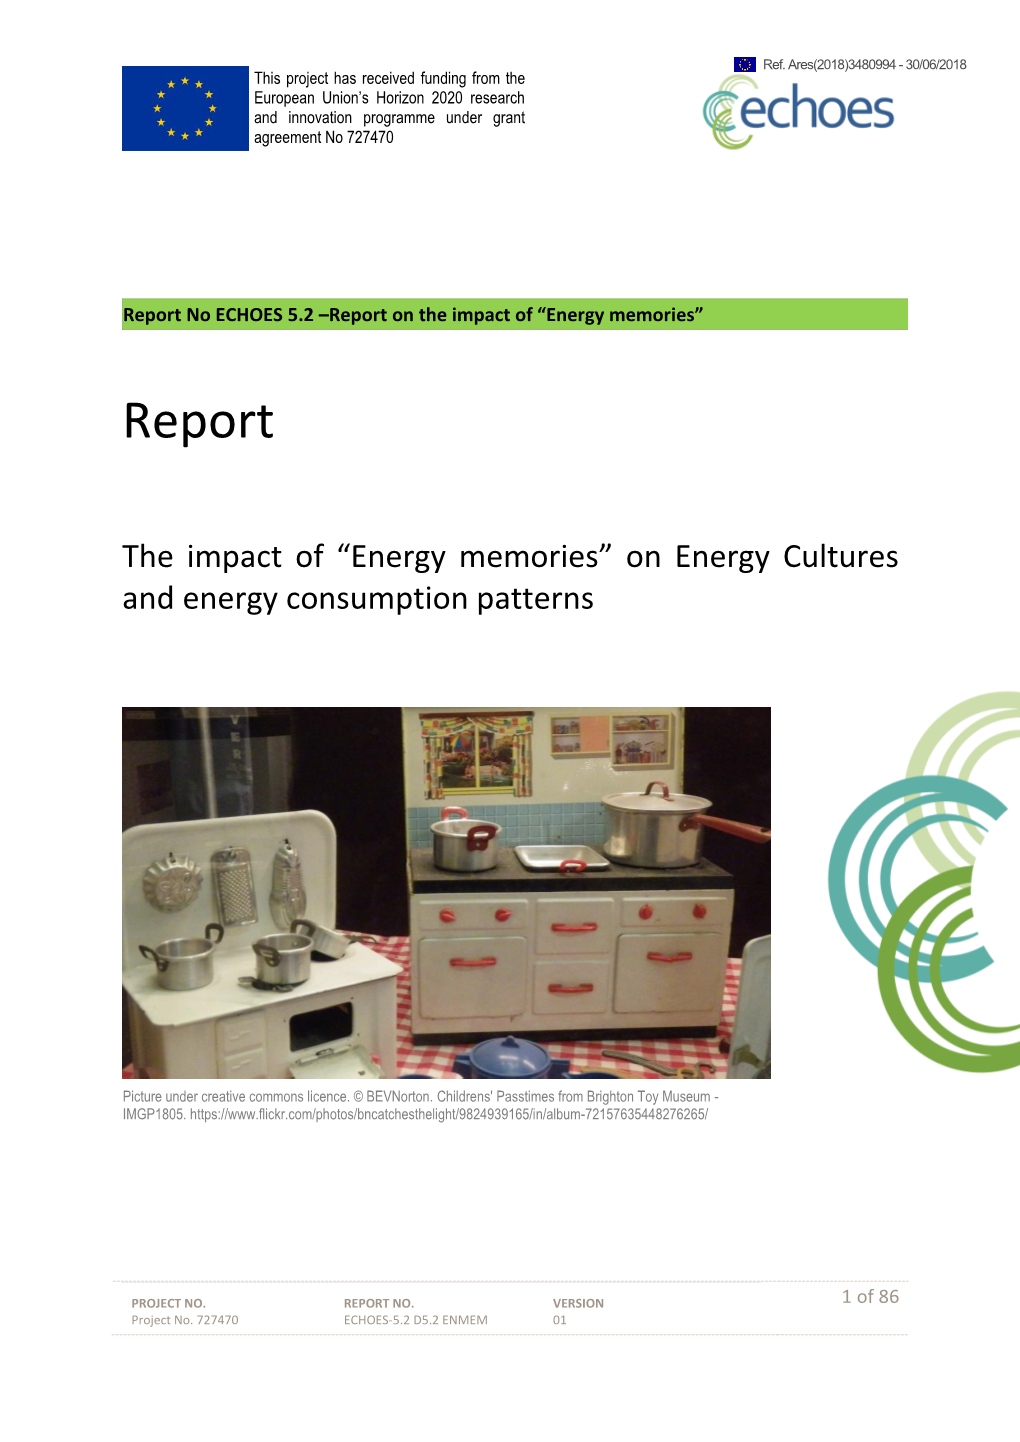 Report on the Impact of Energy Memories